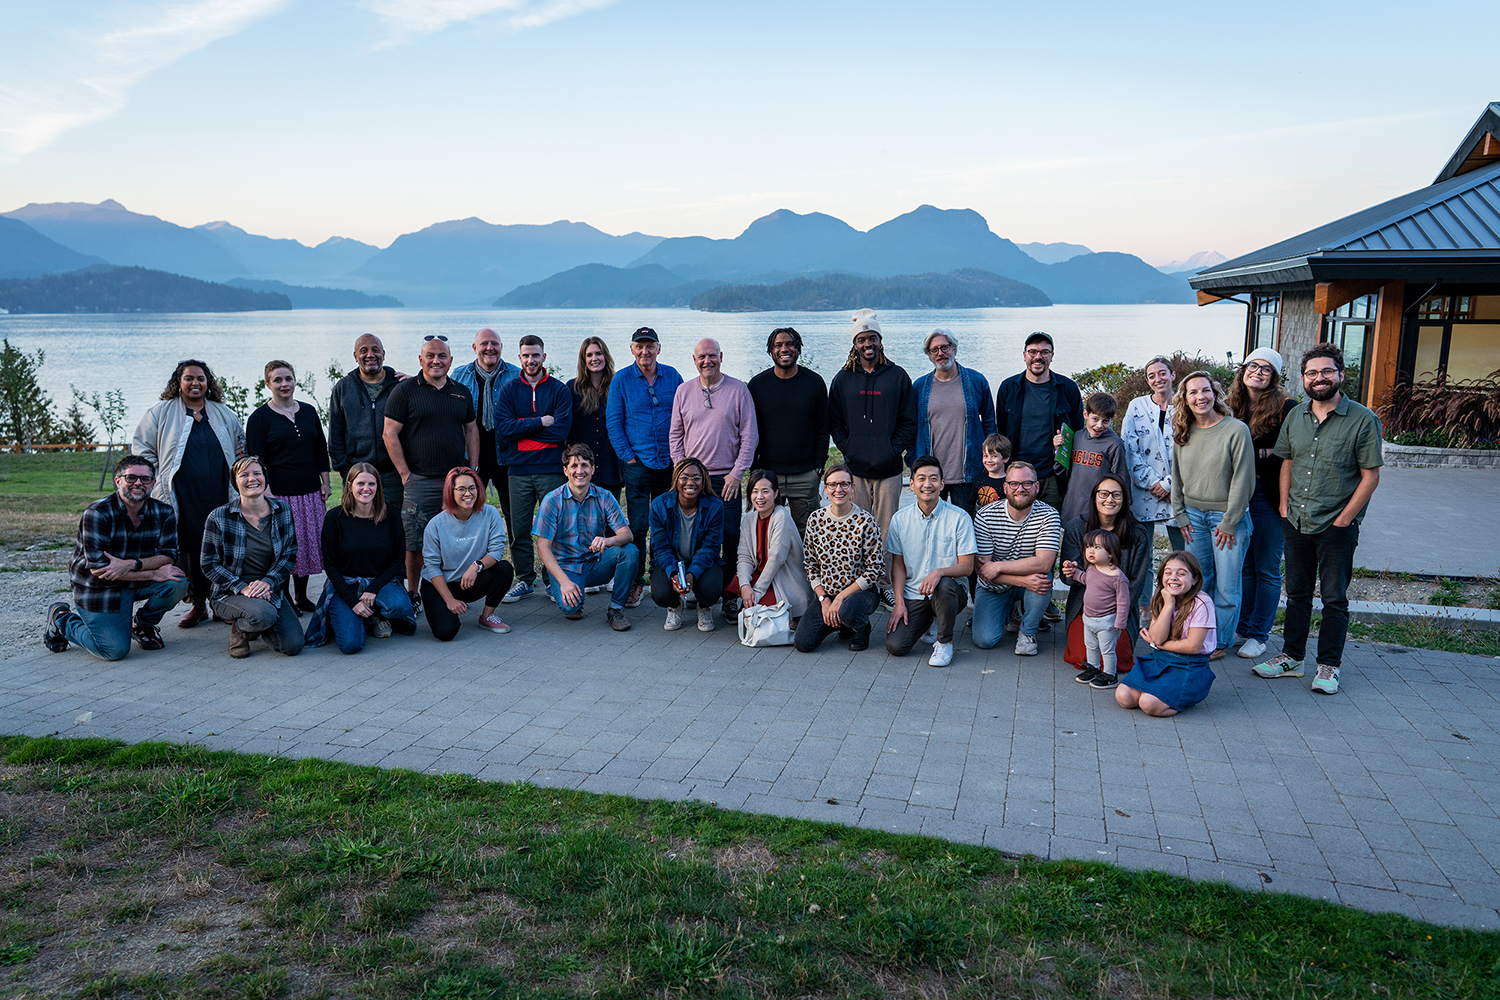 Attendees of the album-writing retreat brought nearly 50 people, not all pictured, to an island off the coast of Vancouver to collaborate and write the twelve-track album. Photo courtesy The Porter’s Gate